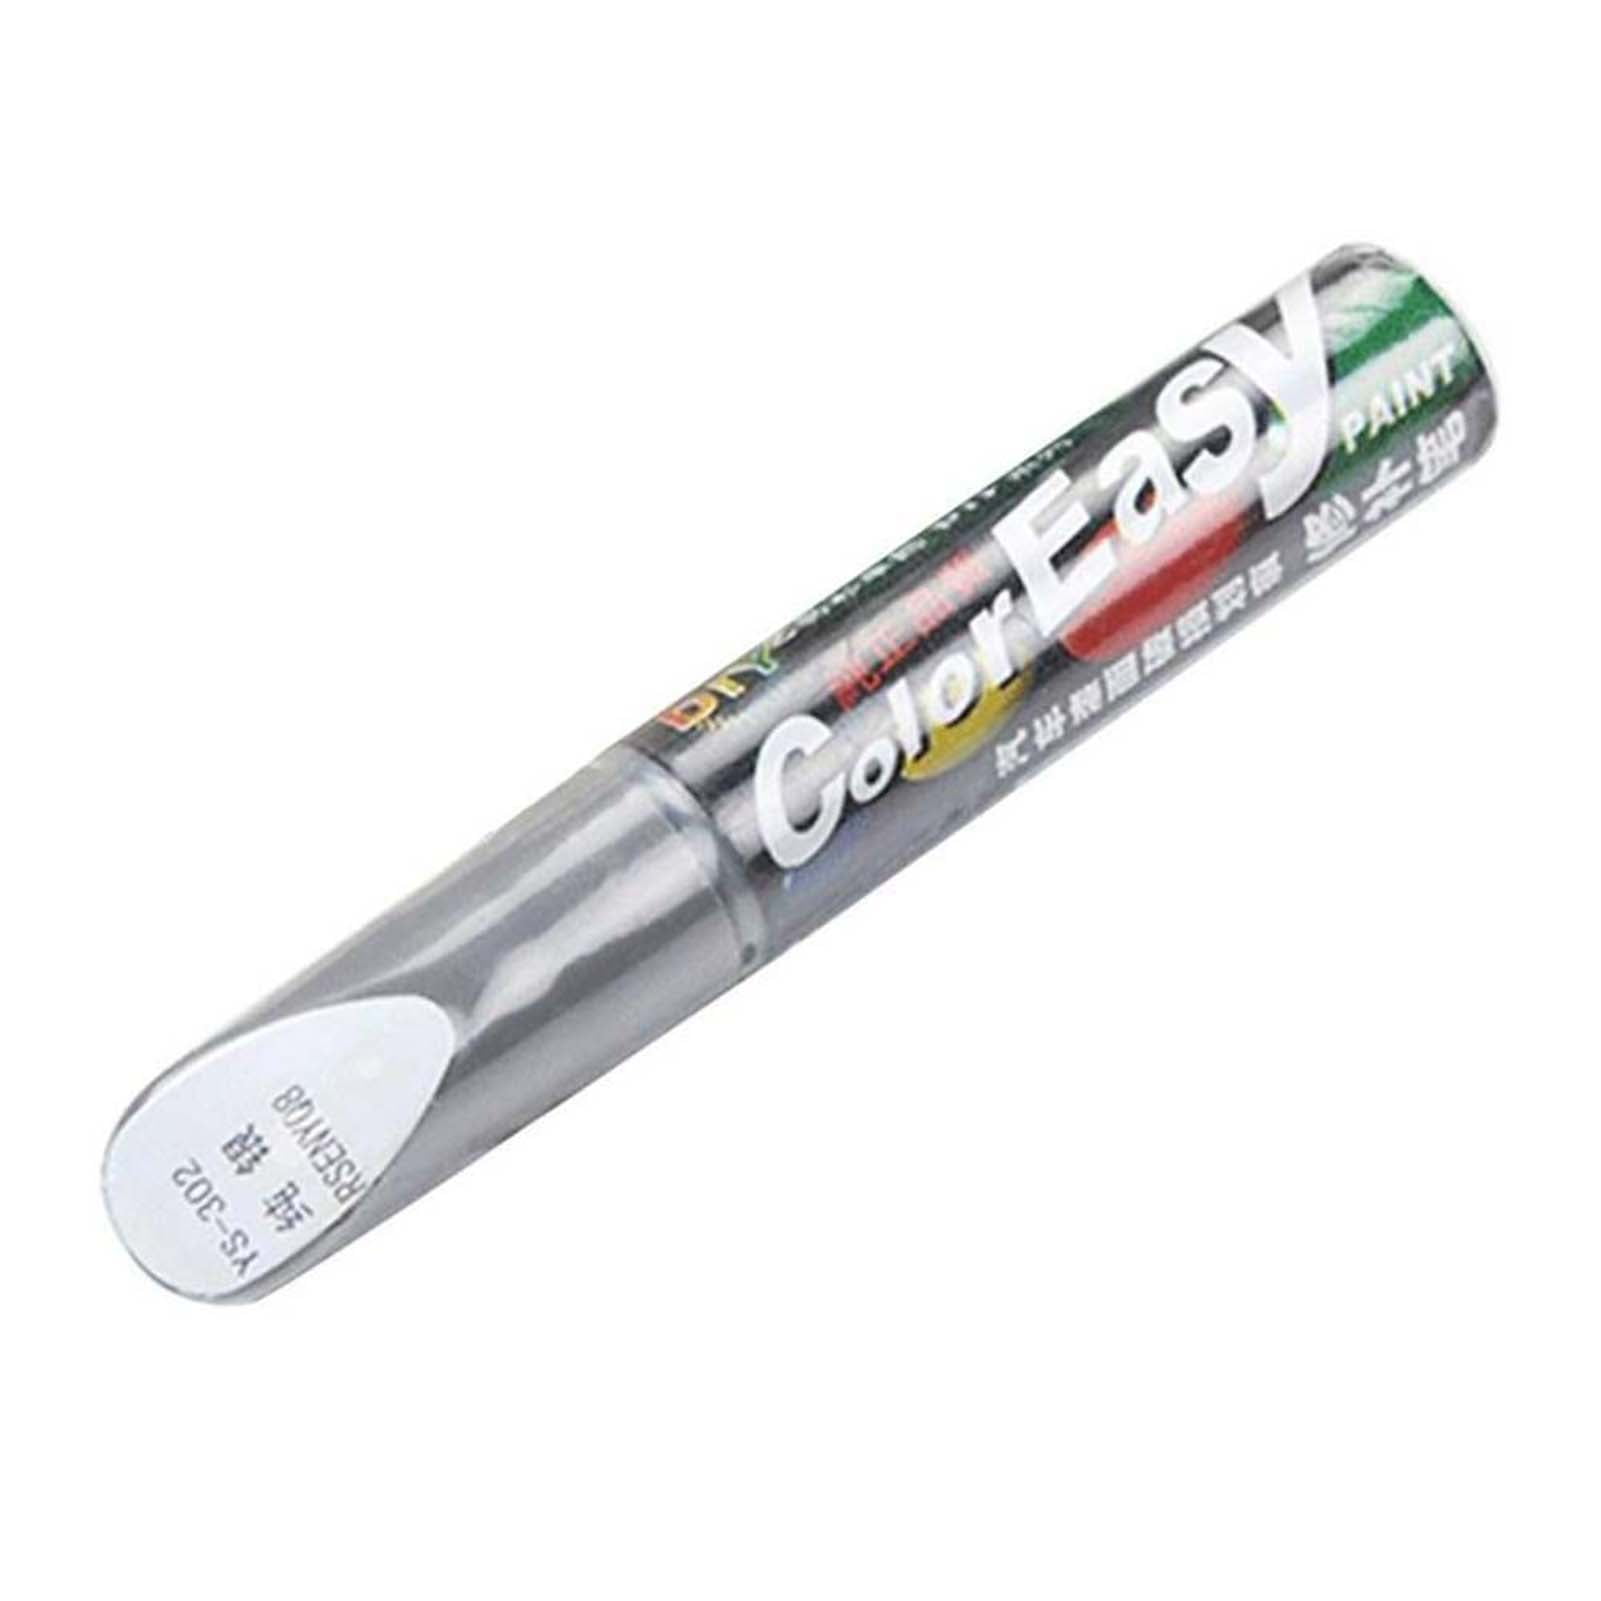 Car Paint Pearl White, Car Touch Up Paint Pen Pearl White, Car Scratch  Remover 12G PACK 